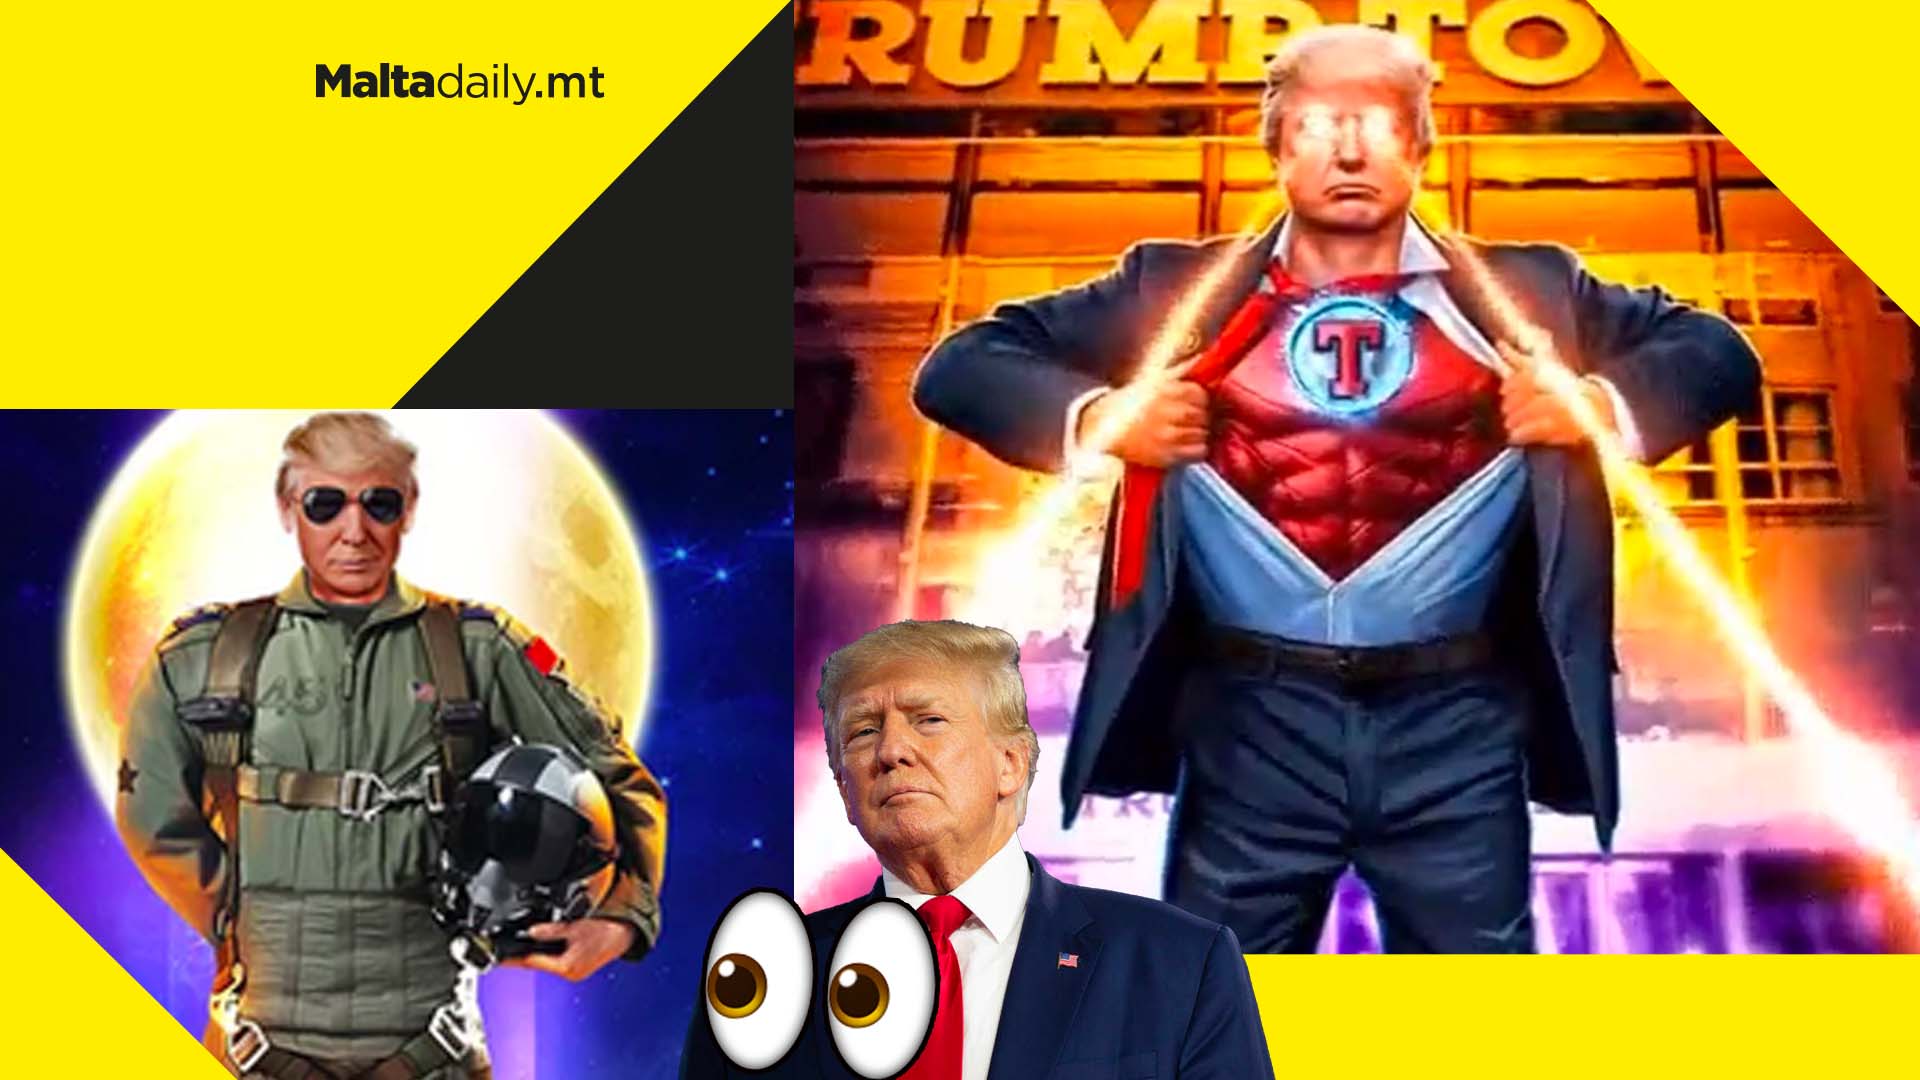 Internet loses it as Donald Trump launches NFT cards about himself